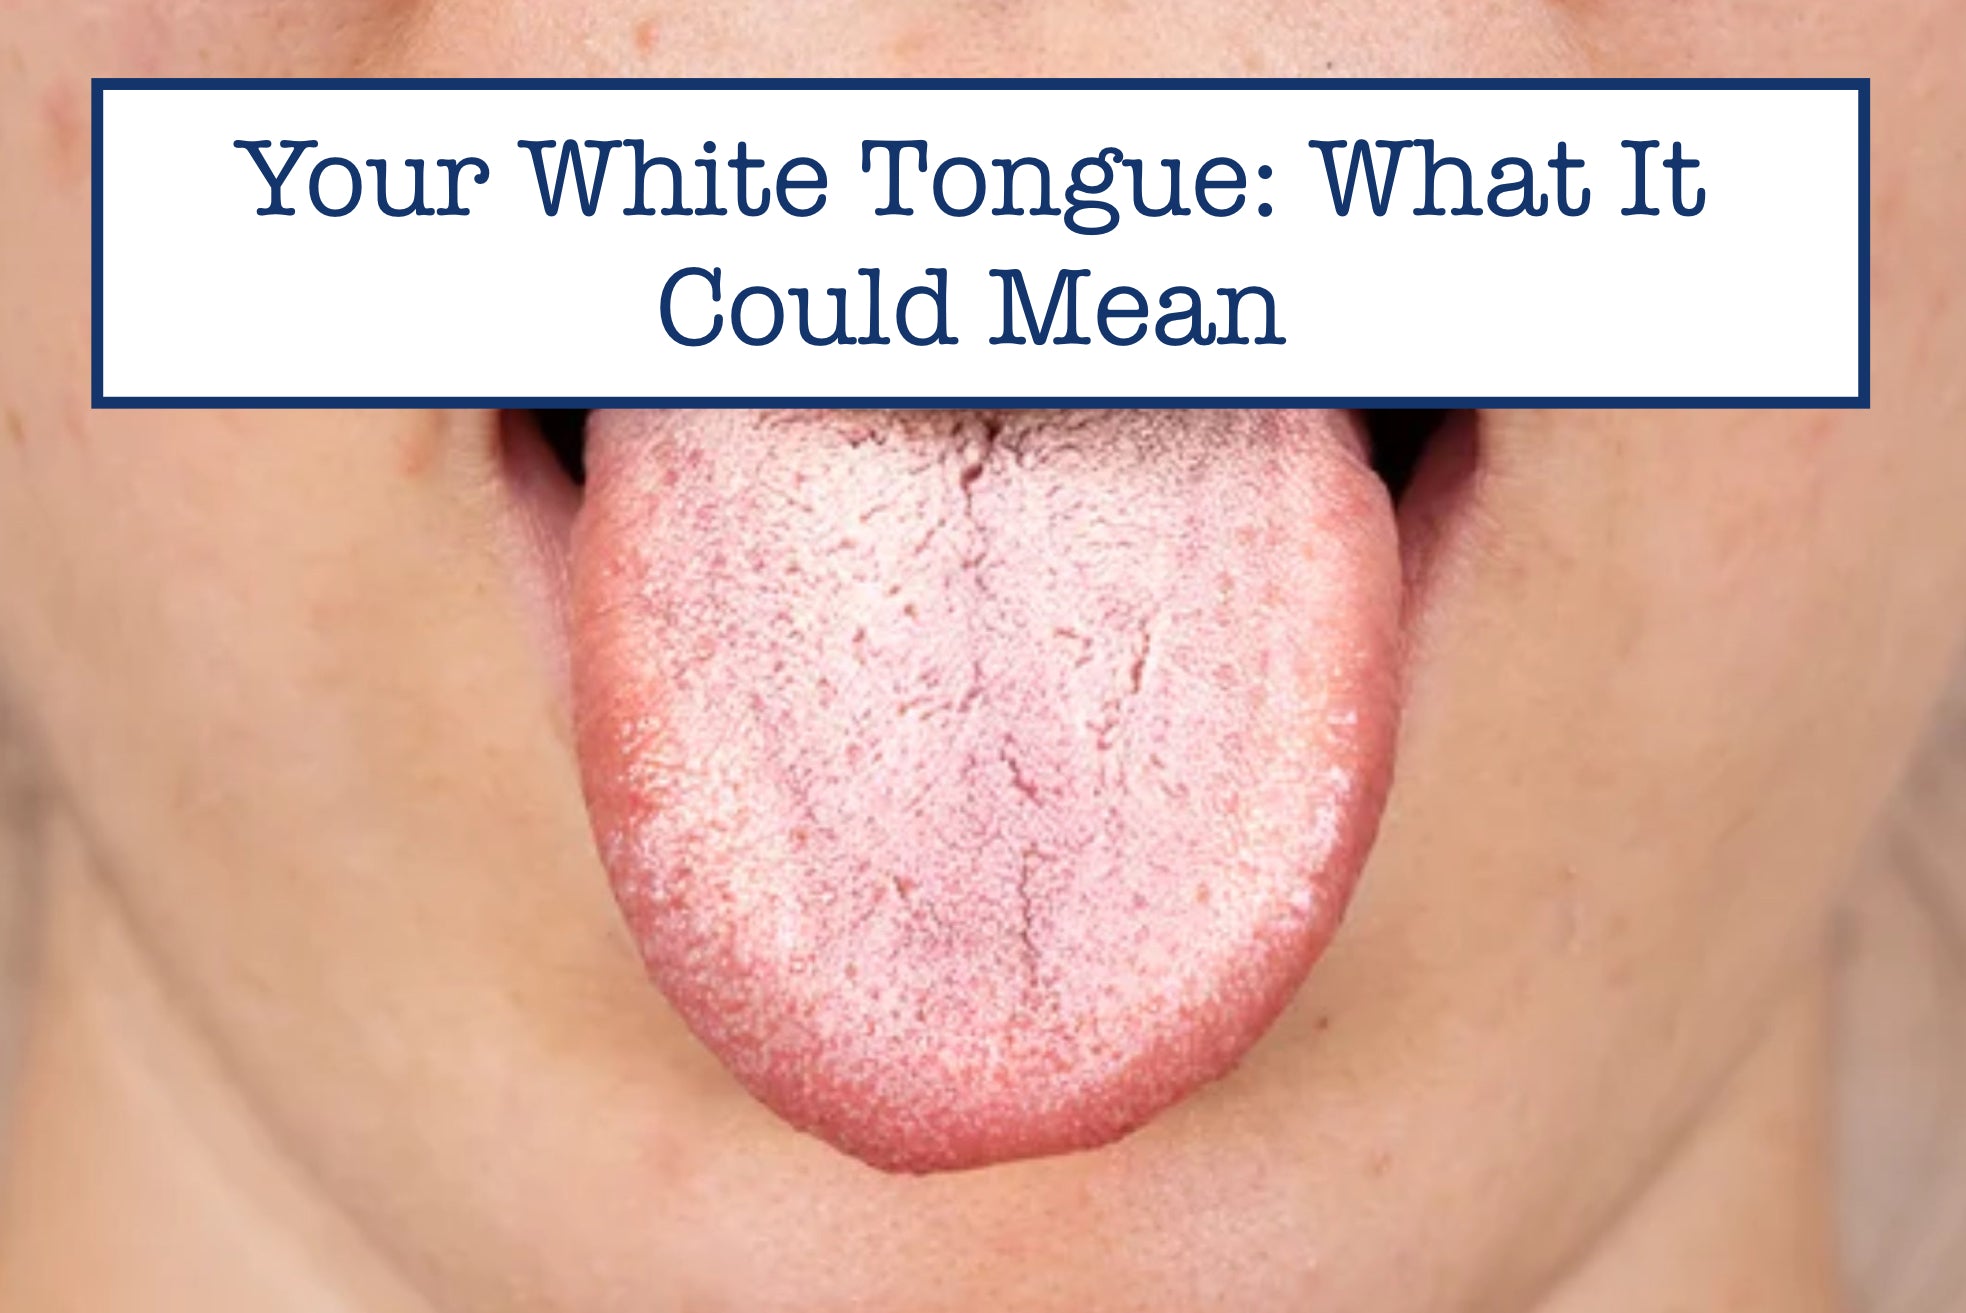 Your White Tongue: What It Could Mean